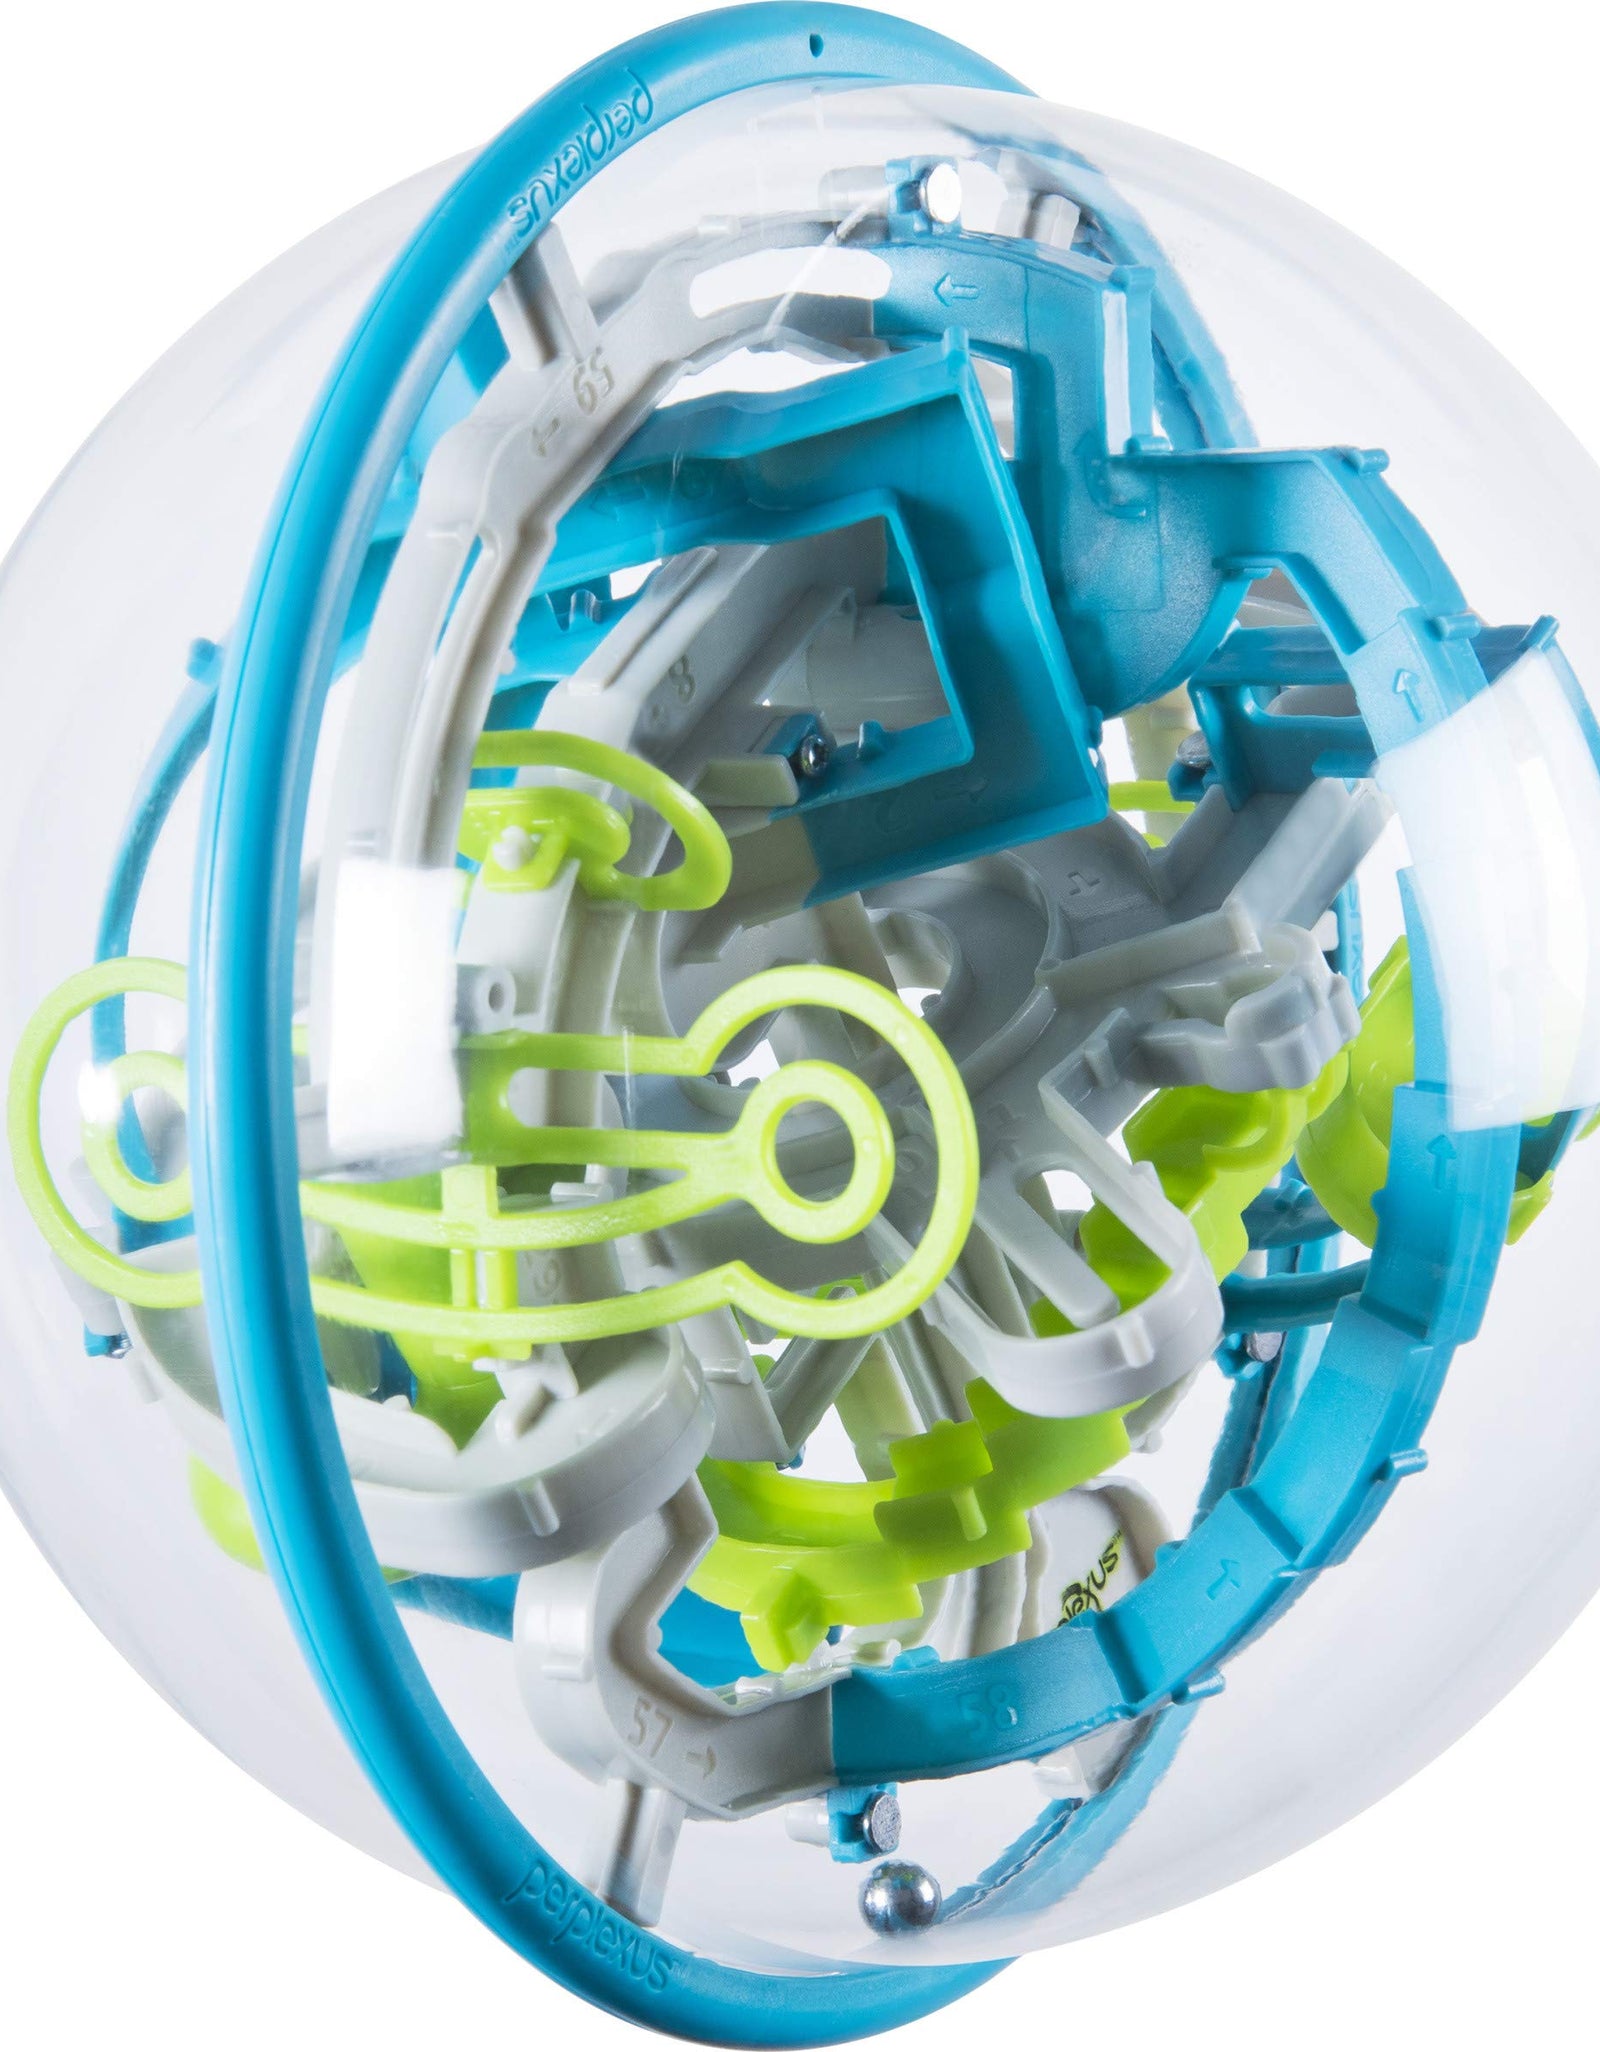 Perplexus Rebel, 3D Maze Game Sensory Fidget Toy Brain Teaser Gravity Maze Puzzle Ball with 70 Obstacles, for Adults & Kids Ages 8+ (Edition May Vary)